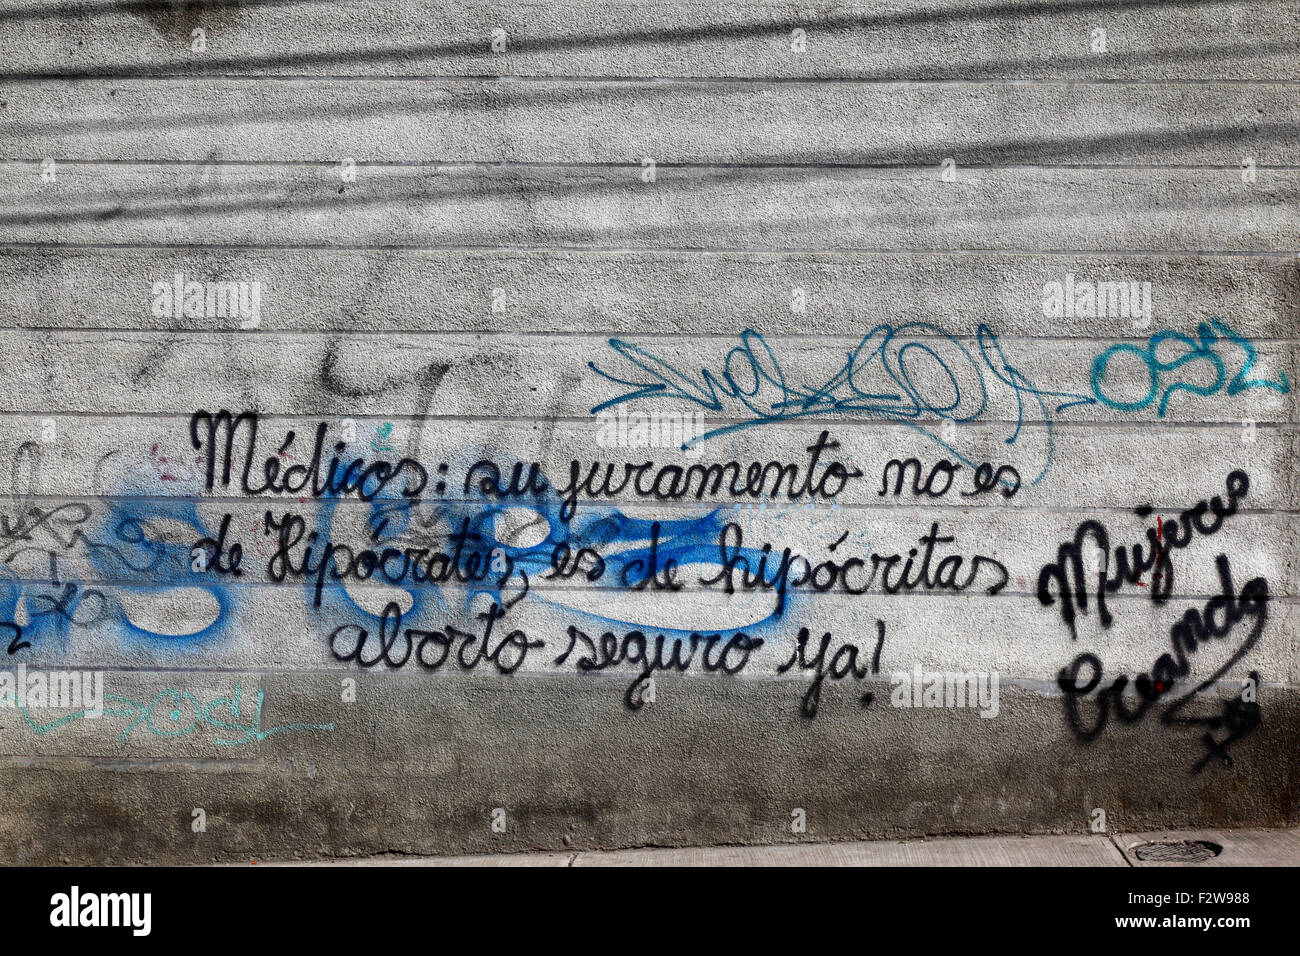 Graffiti on wall demanding the right to abortion for women by the  feminist group Mujeres Creando, La Paz, Bolivia Stock Photo